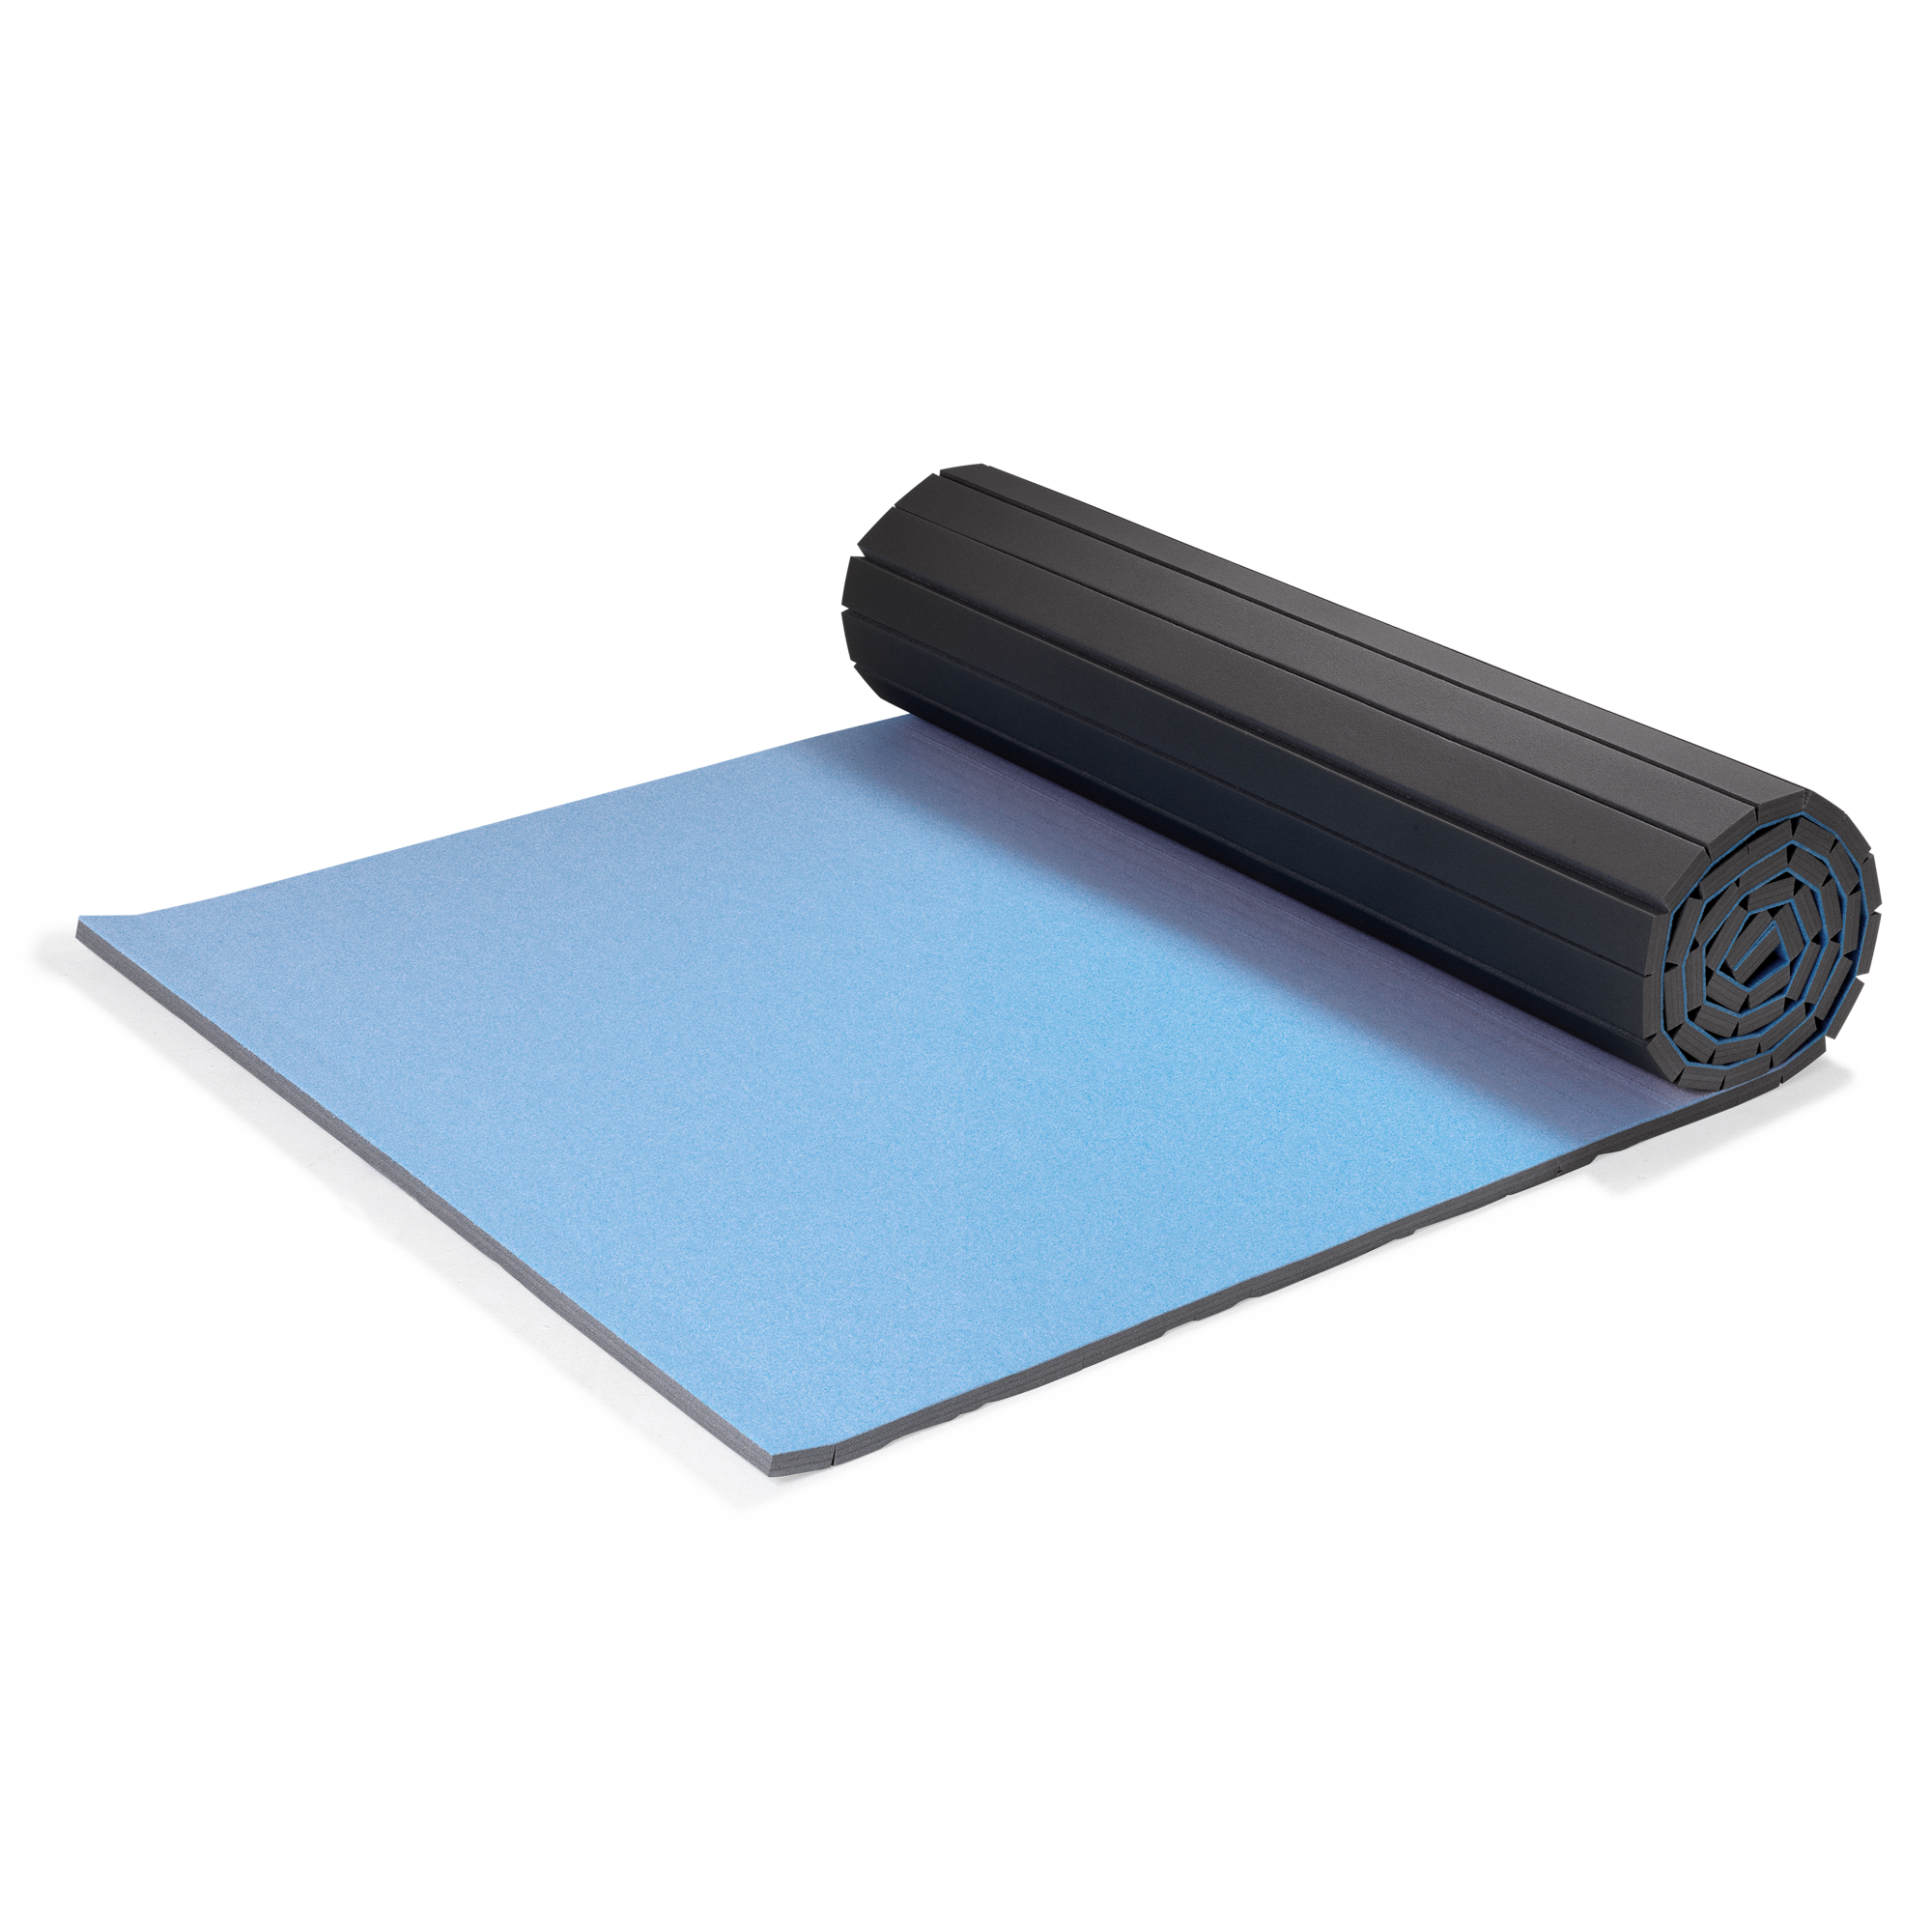 Rollable Mat "Flexi-Roll" - Area 14 x 14 m